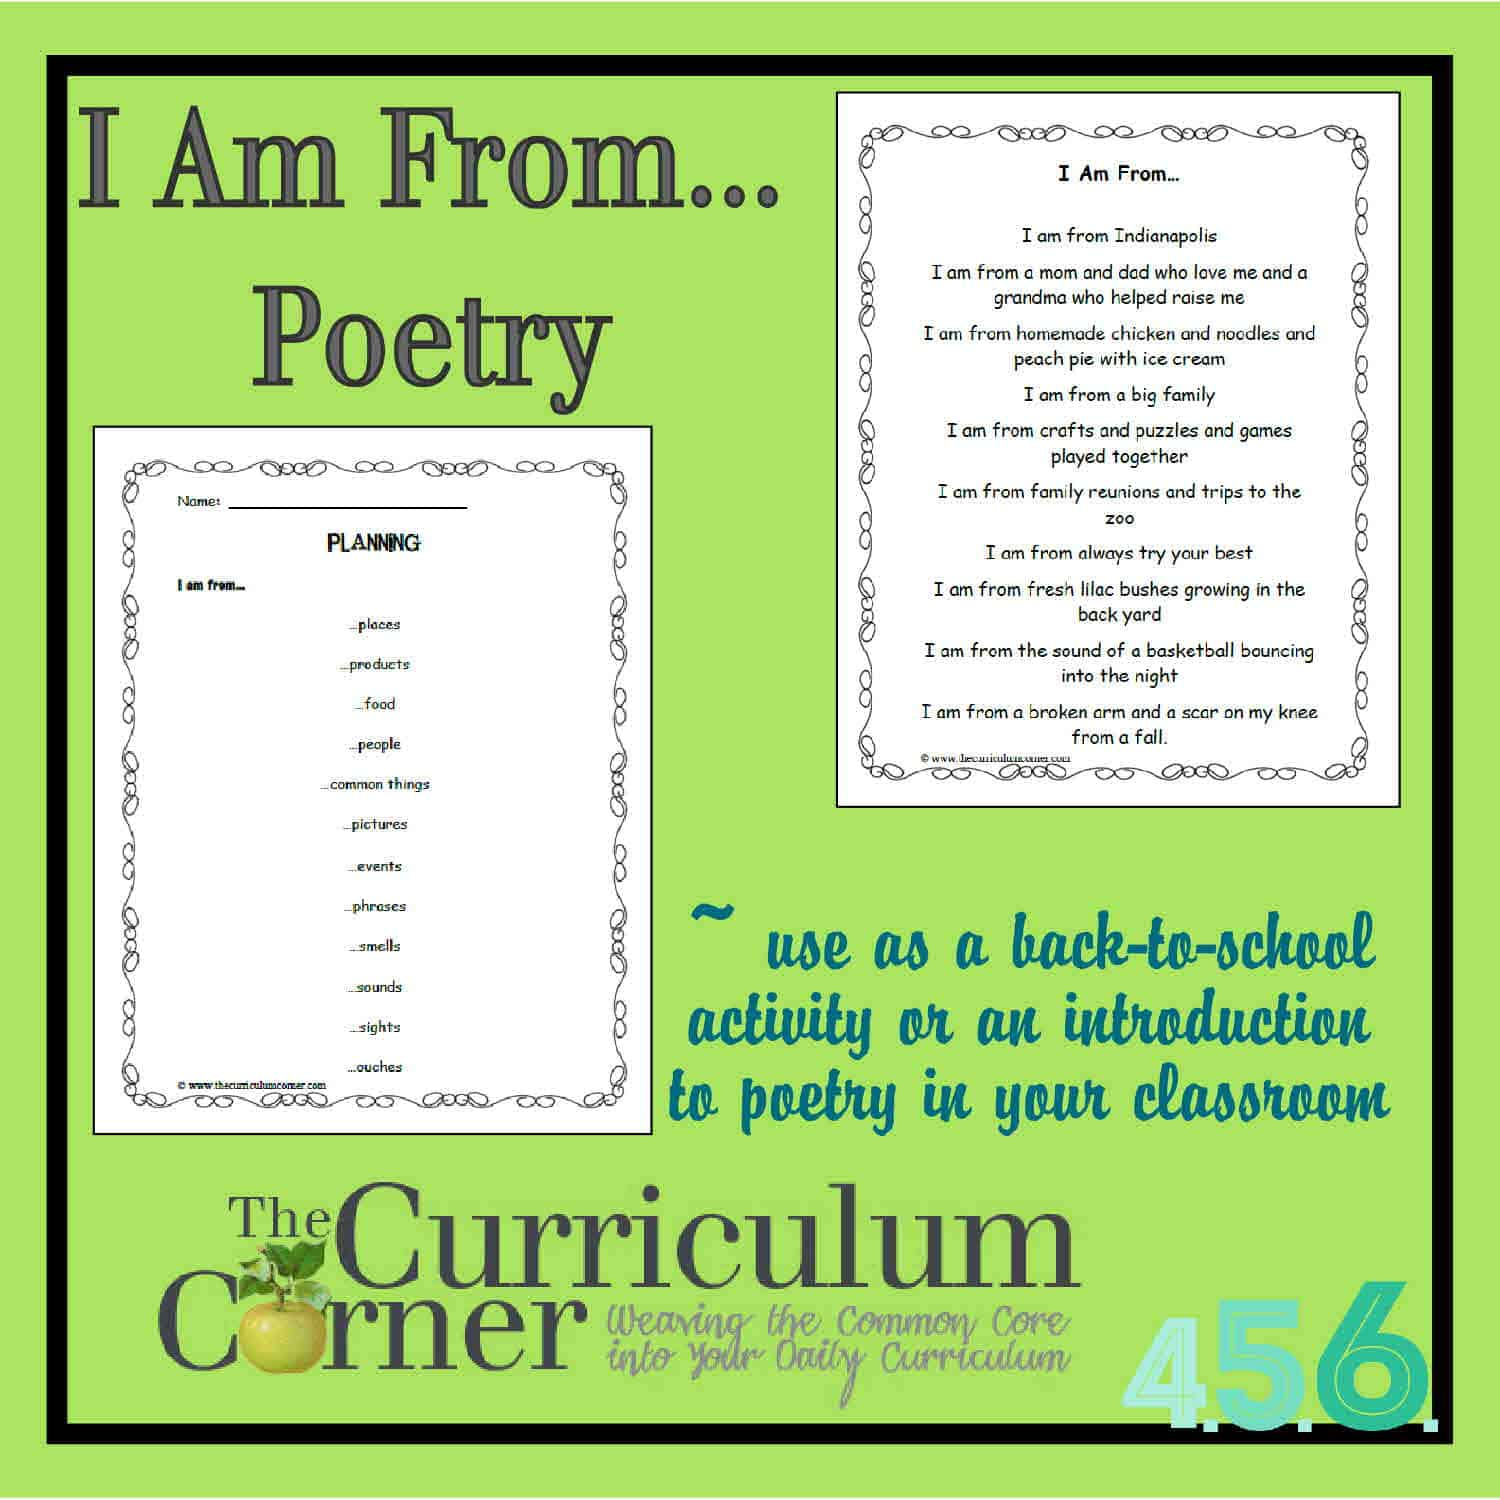 I Am From Poetry - The Curriculum Corner 4-5-6